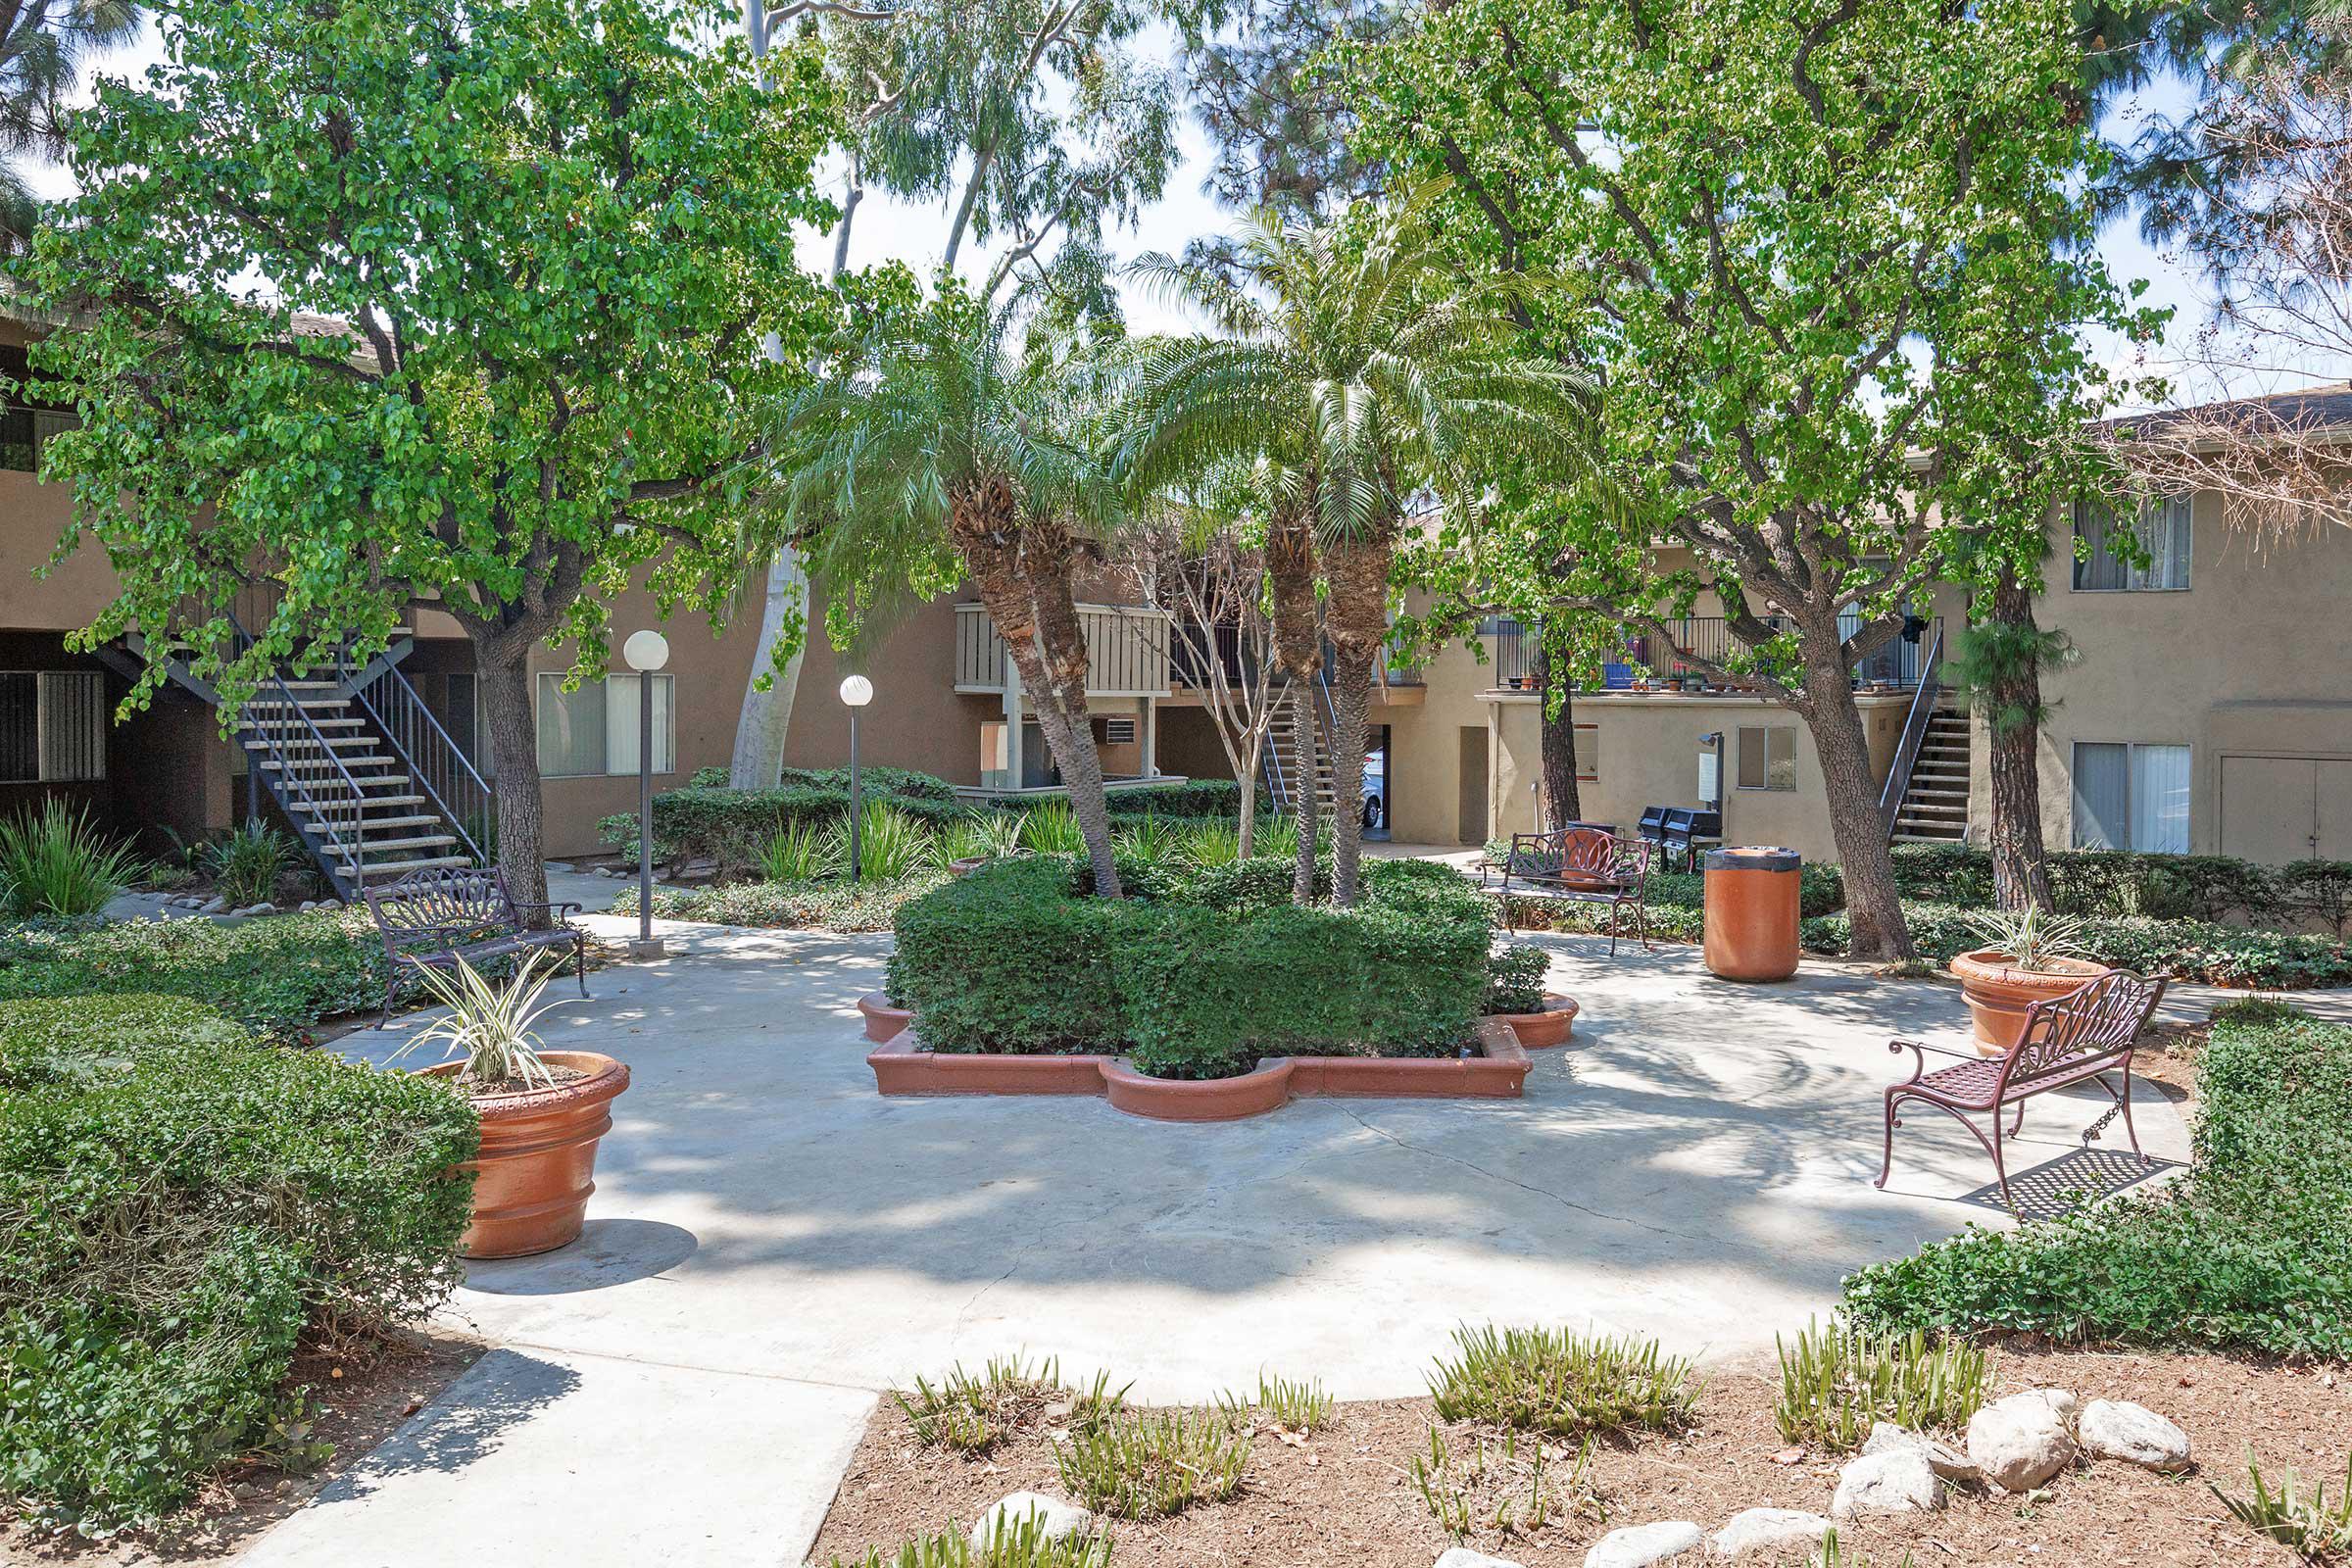 Five Coves Apartment Homes courtyard with green landscaping